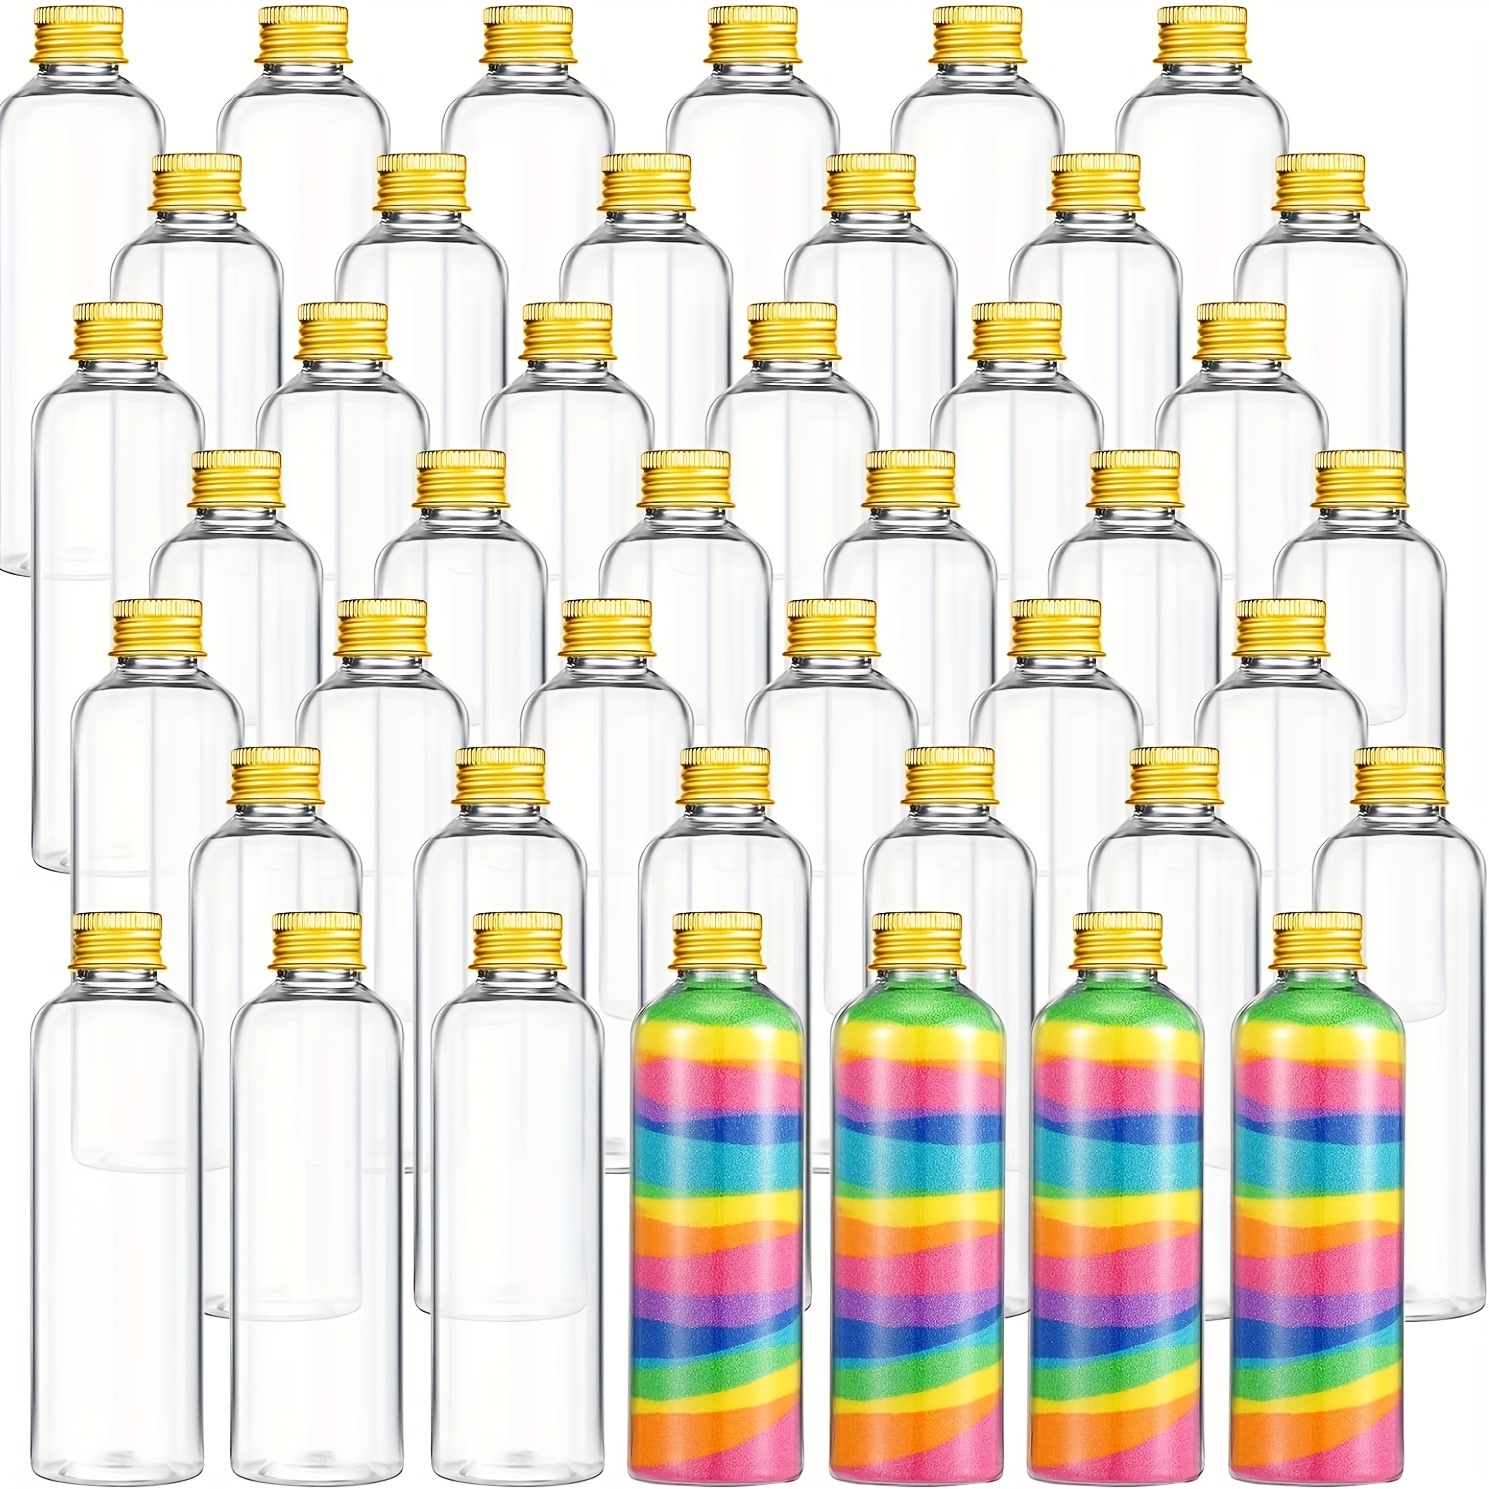 

5/10pcs Craft Sand Art Bottles With Golden Caps, 4oz Clear Plastic Bottles For Wedding, Birthday, Art Projects, Classroom Wishes & Messages